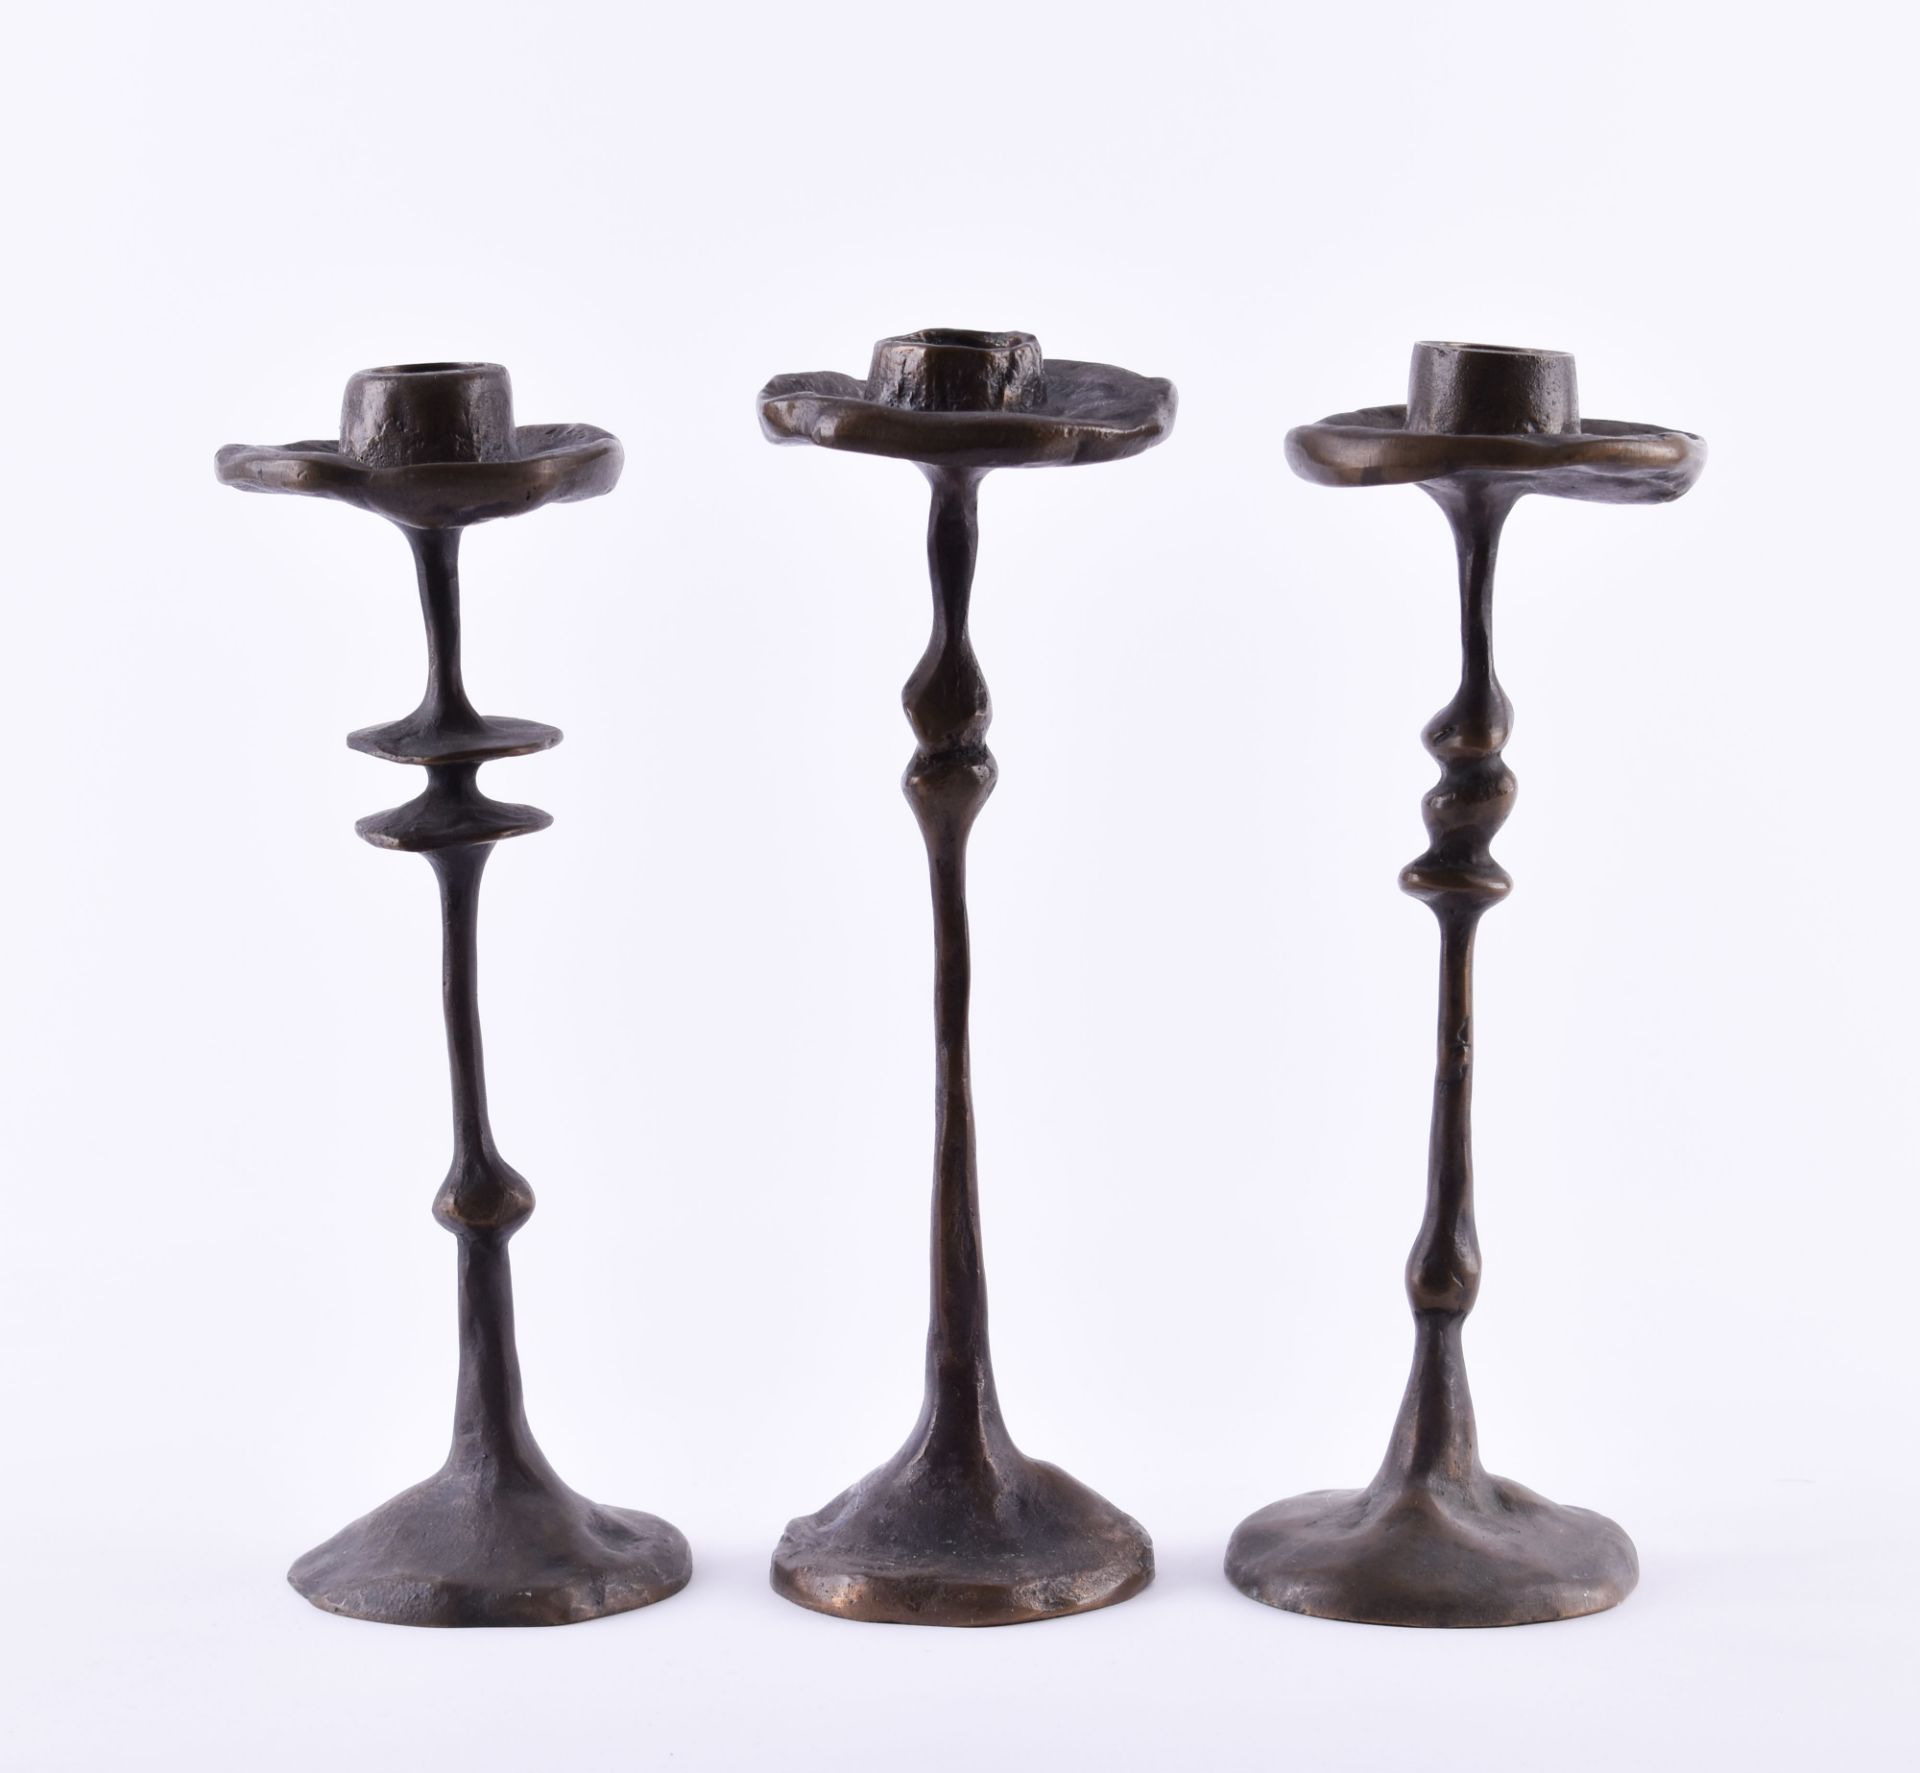 3 bronze candle holderseach signed and dated, 1980 / 81, height: each 25 cm3